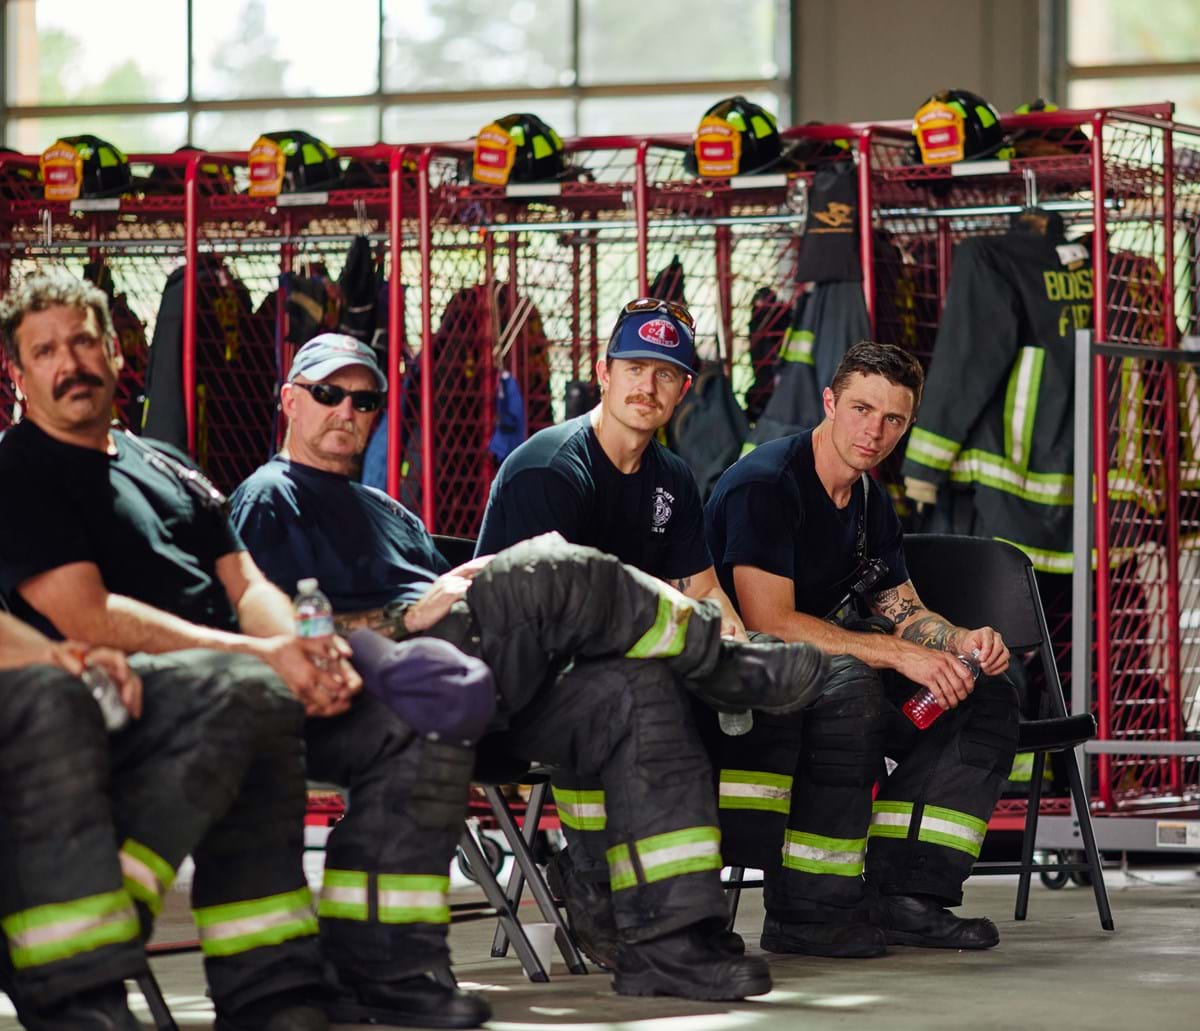 Firefighters in training with uniforms and helmets in the background